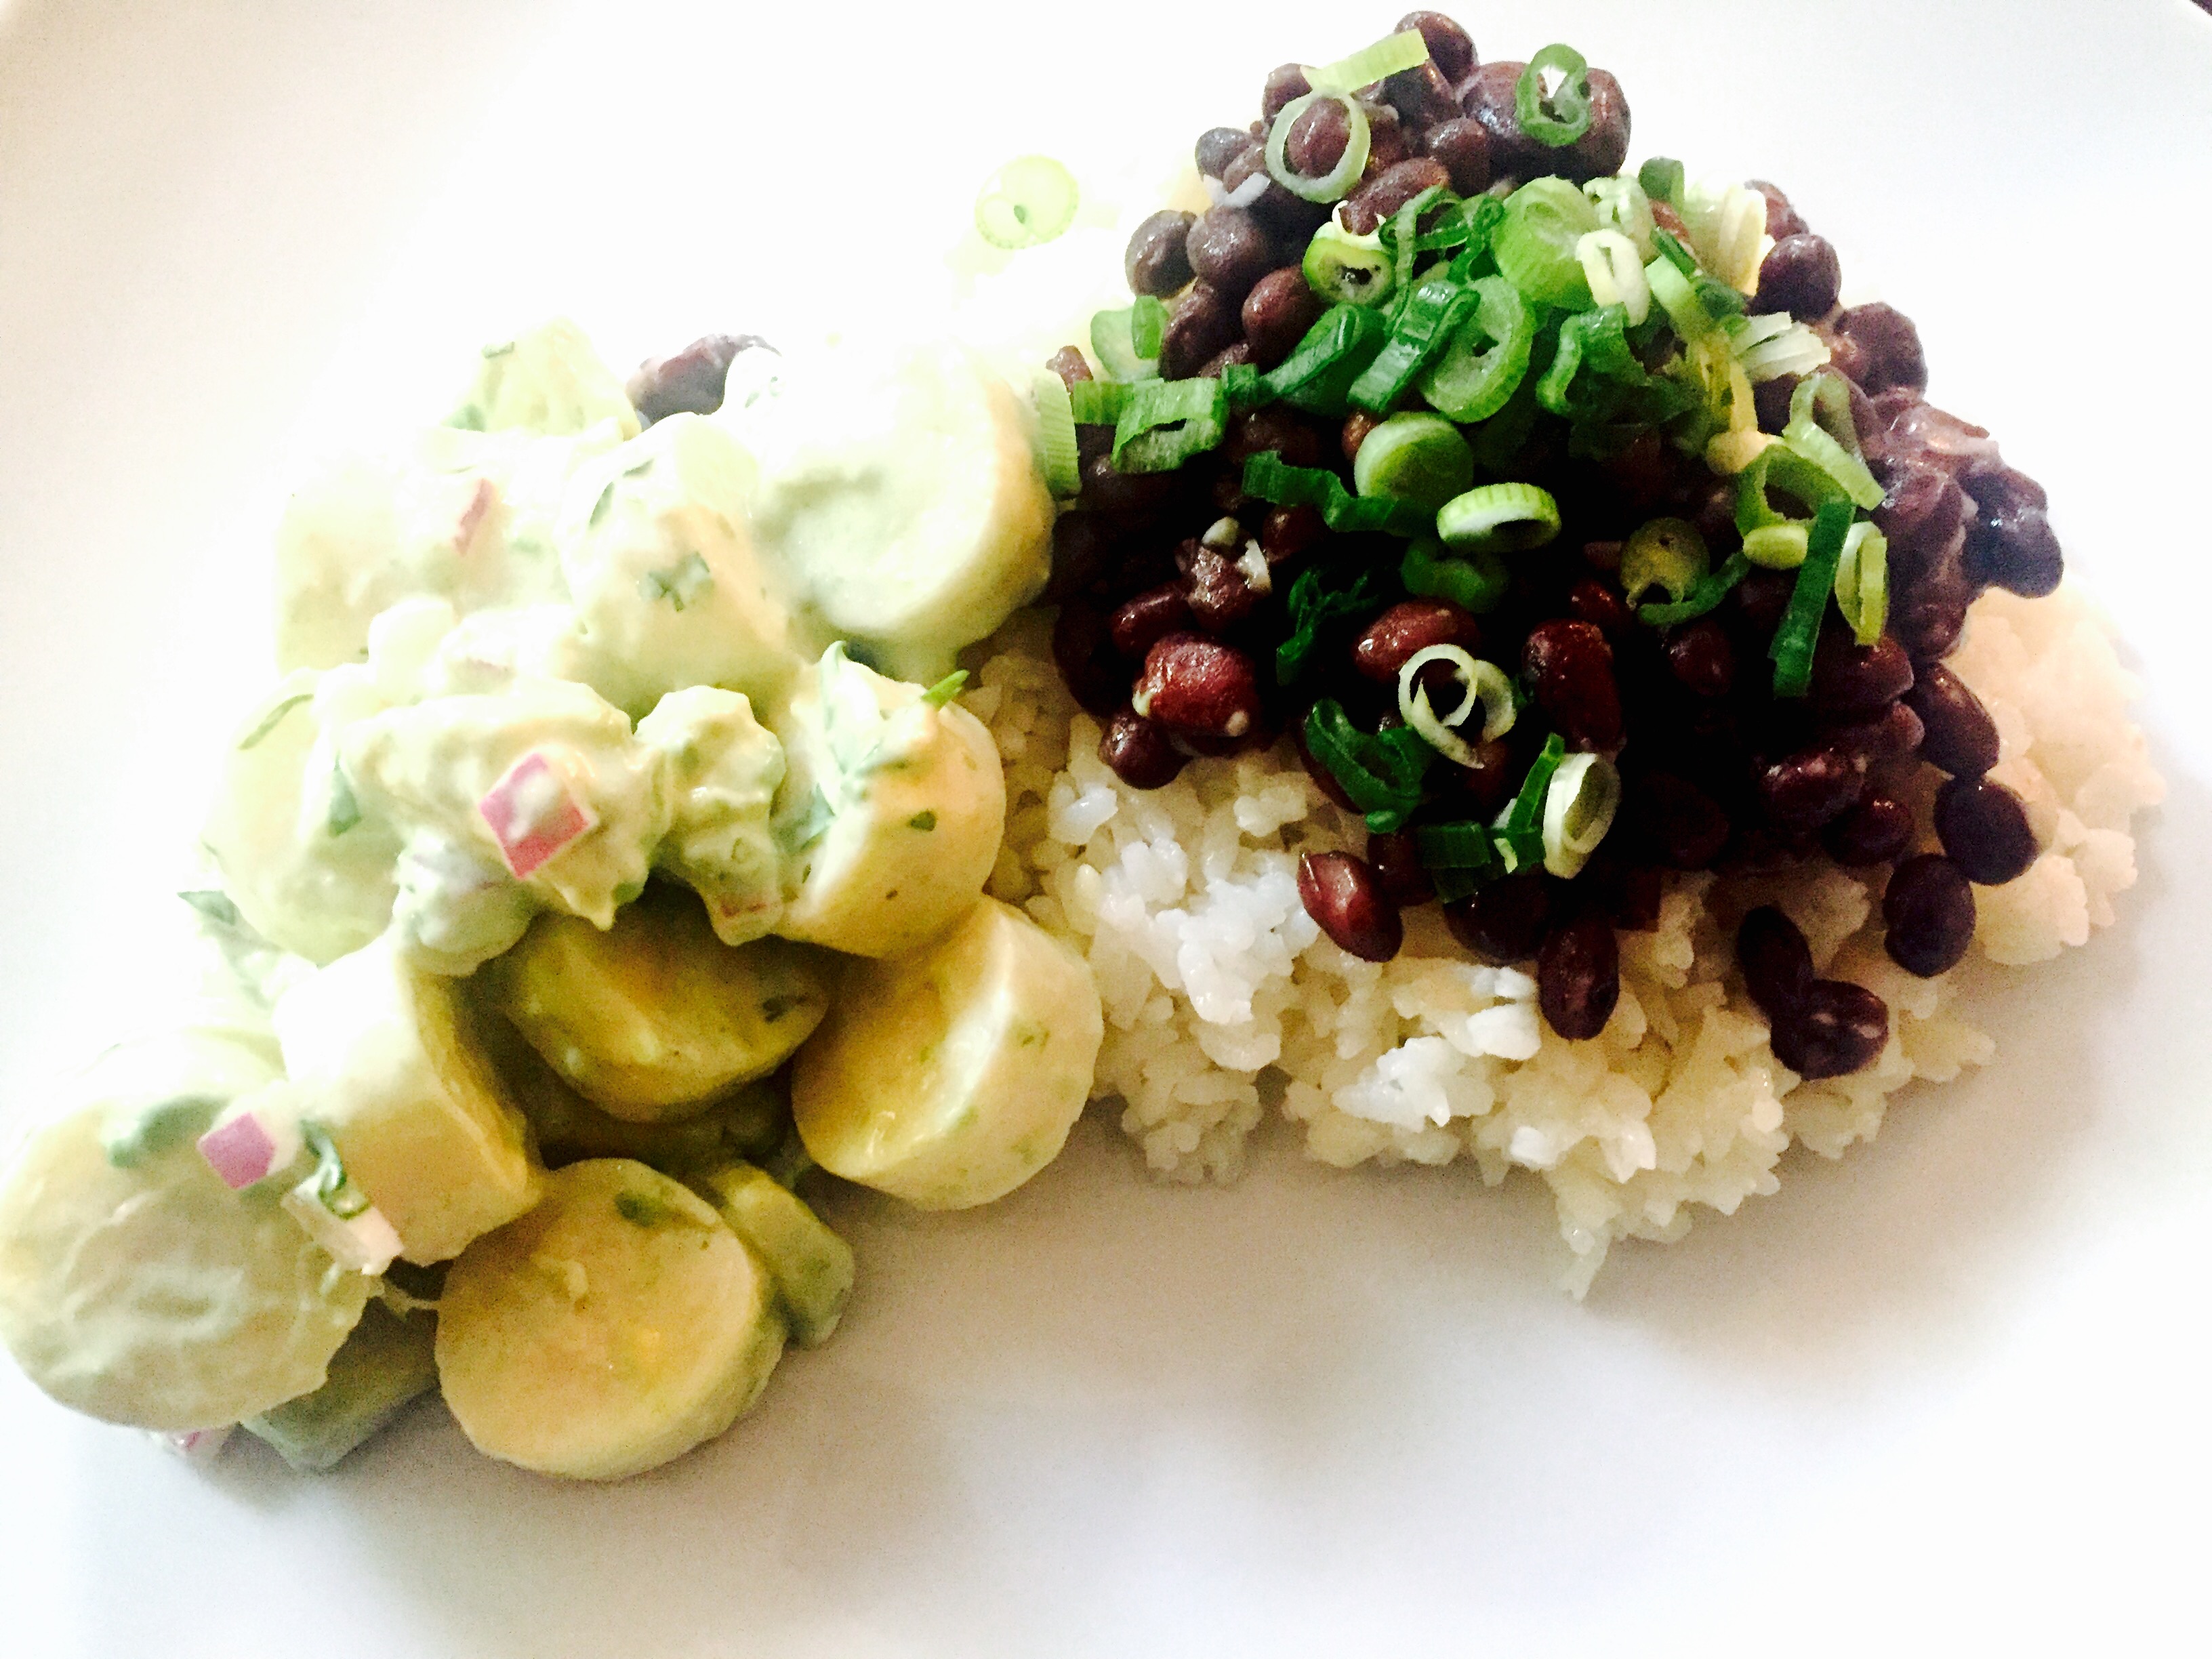 Brazilian rice and beans with hearts of palm & avocado salad